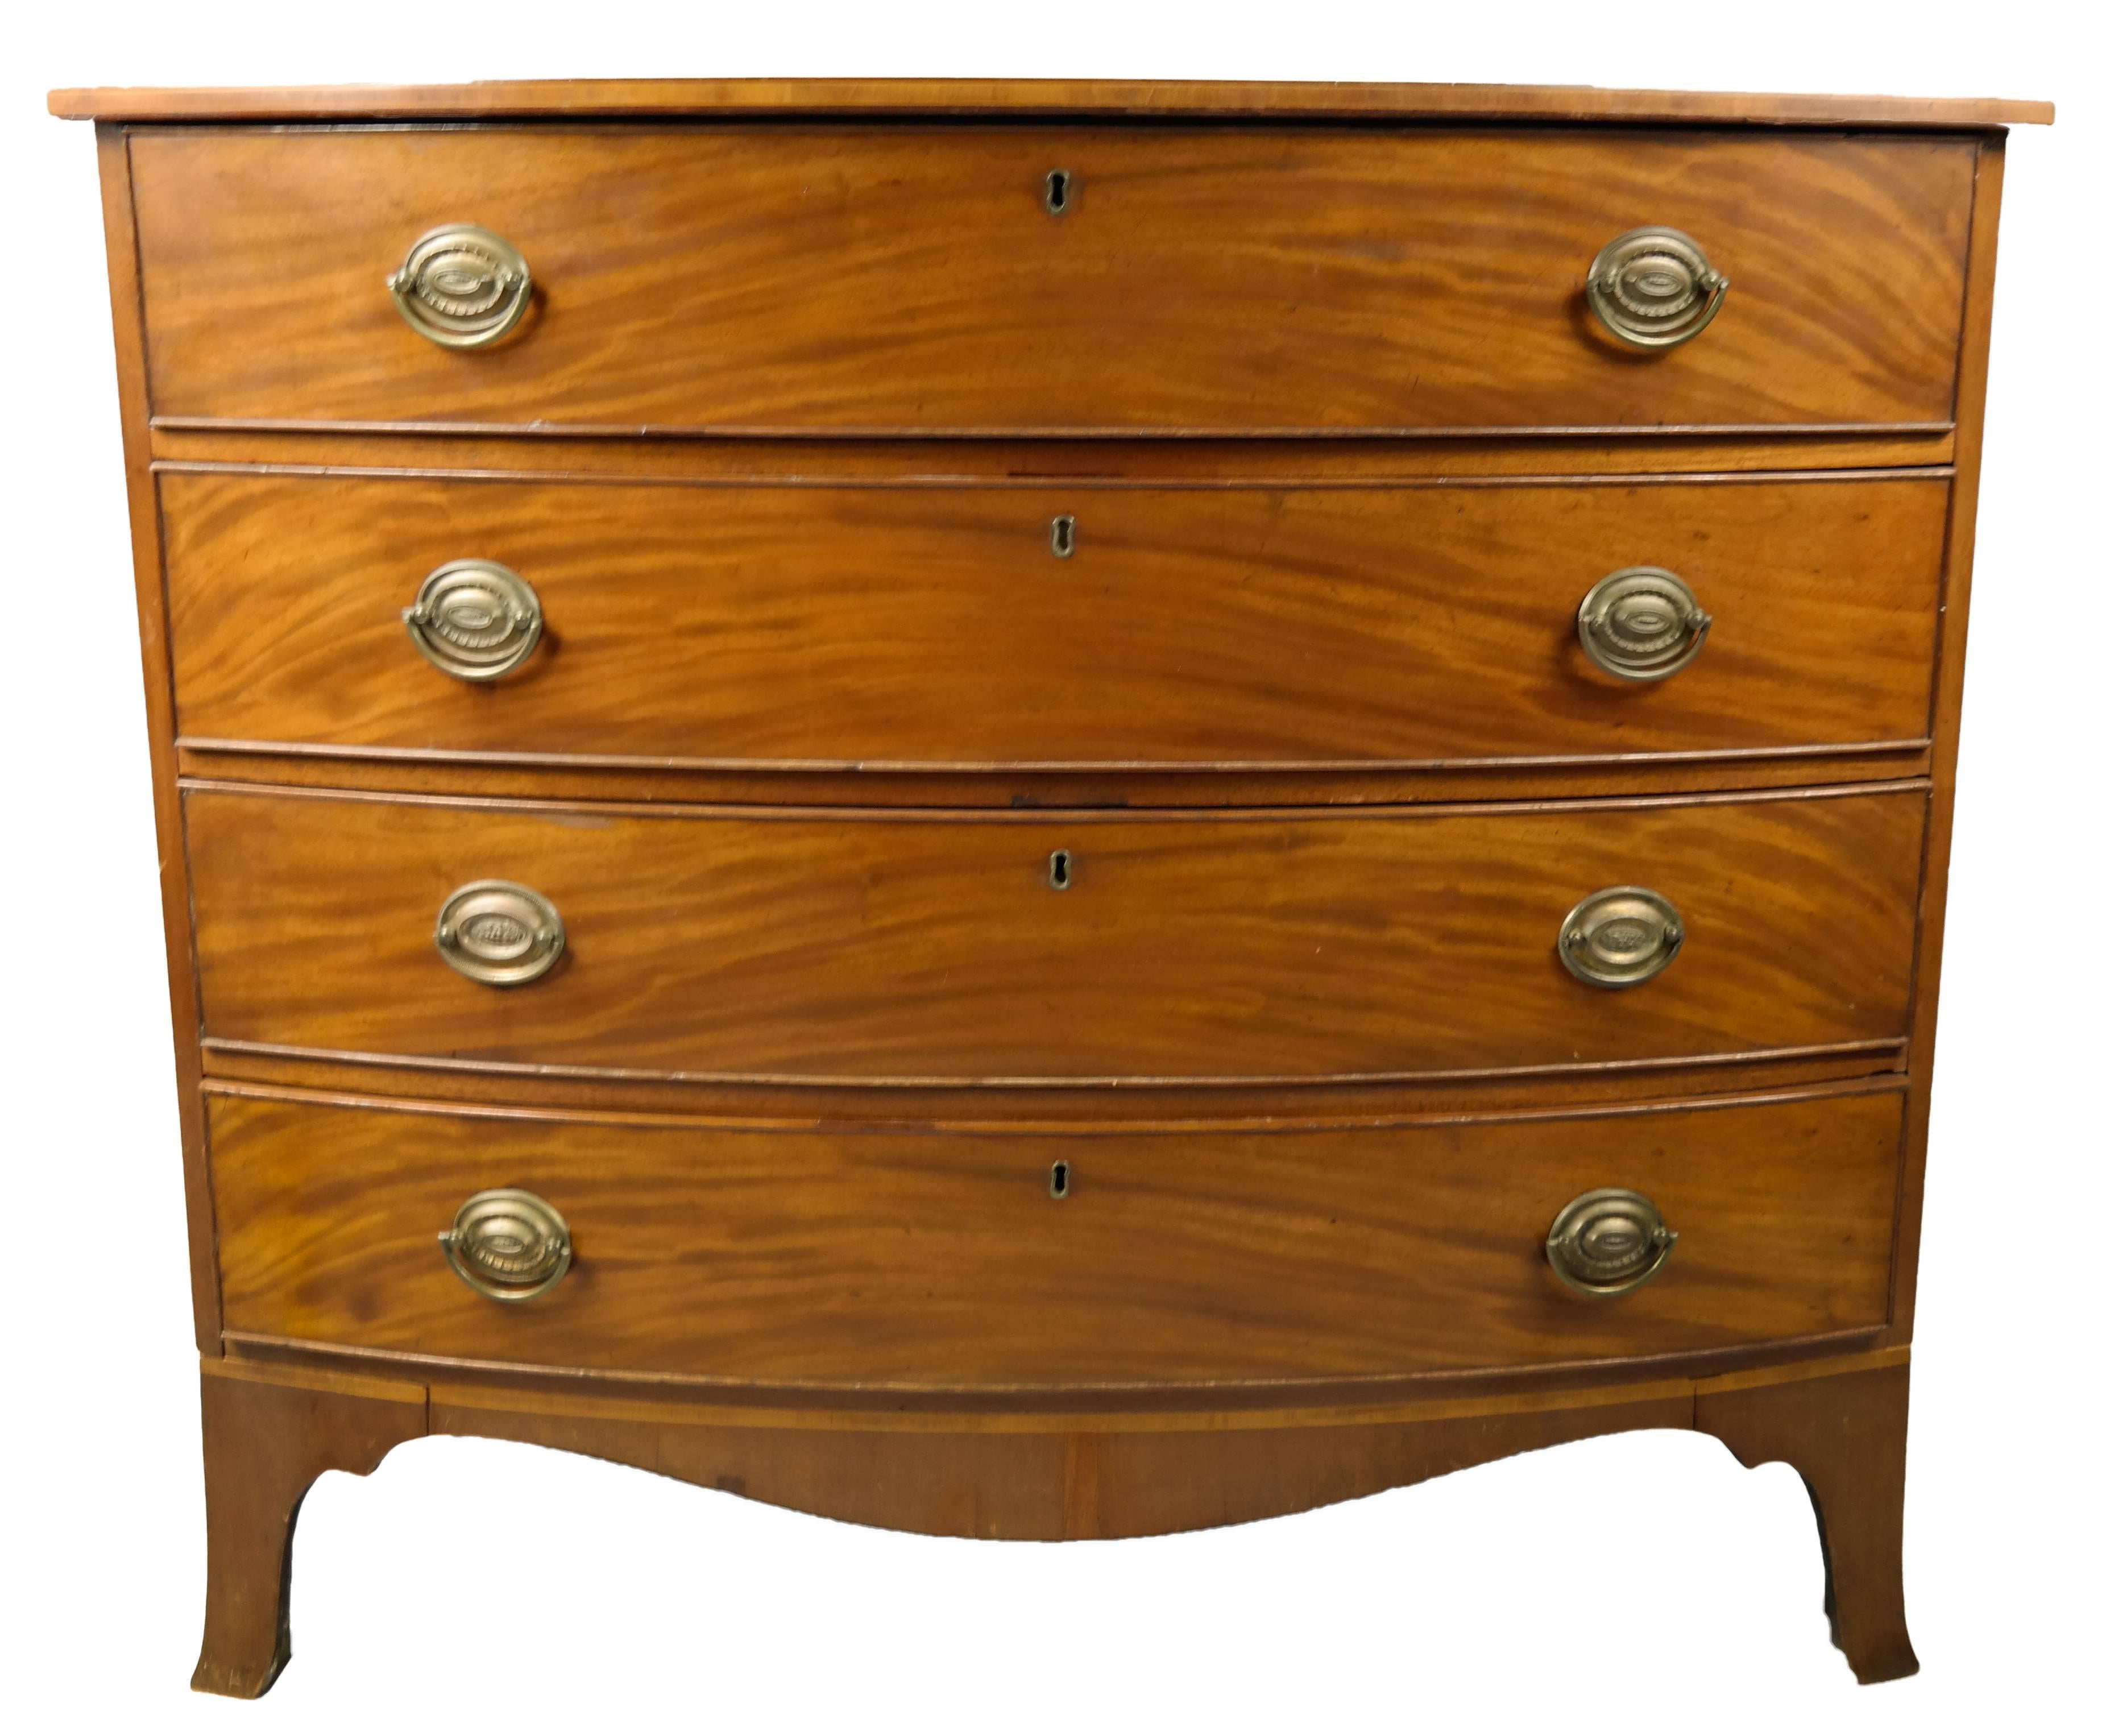 Mahogany bowfront chest of drawers, a single board top with banding and inlay, above four drawers with beading, a banded base on splayed feet, made in New England (Mass.), circa 1790.